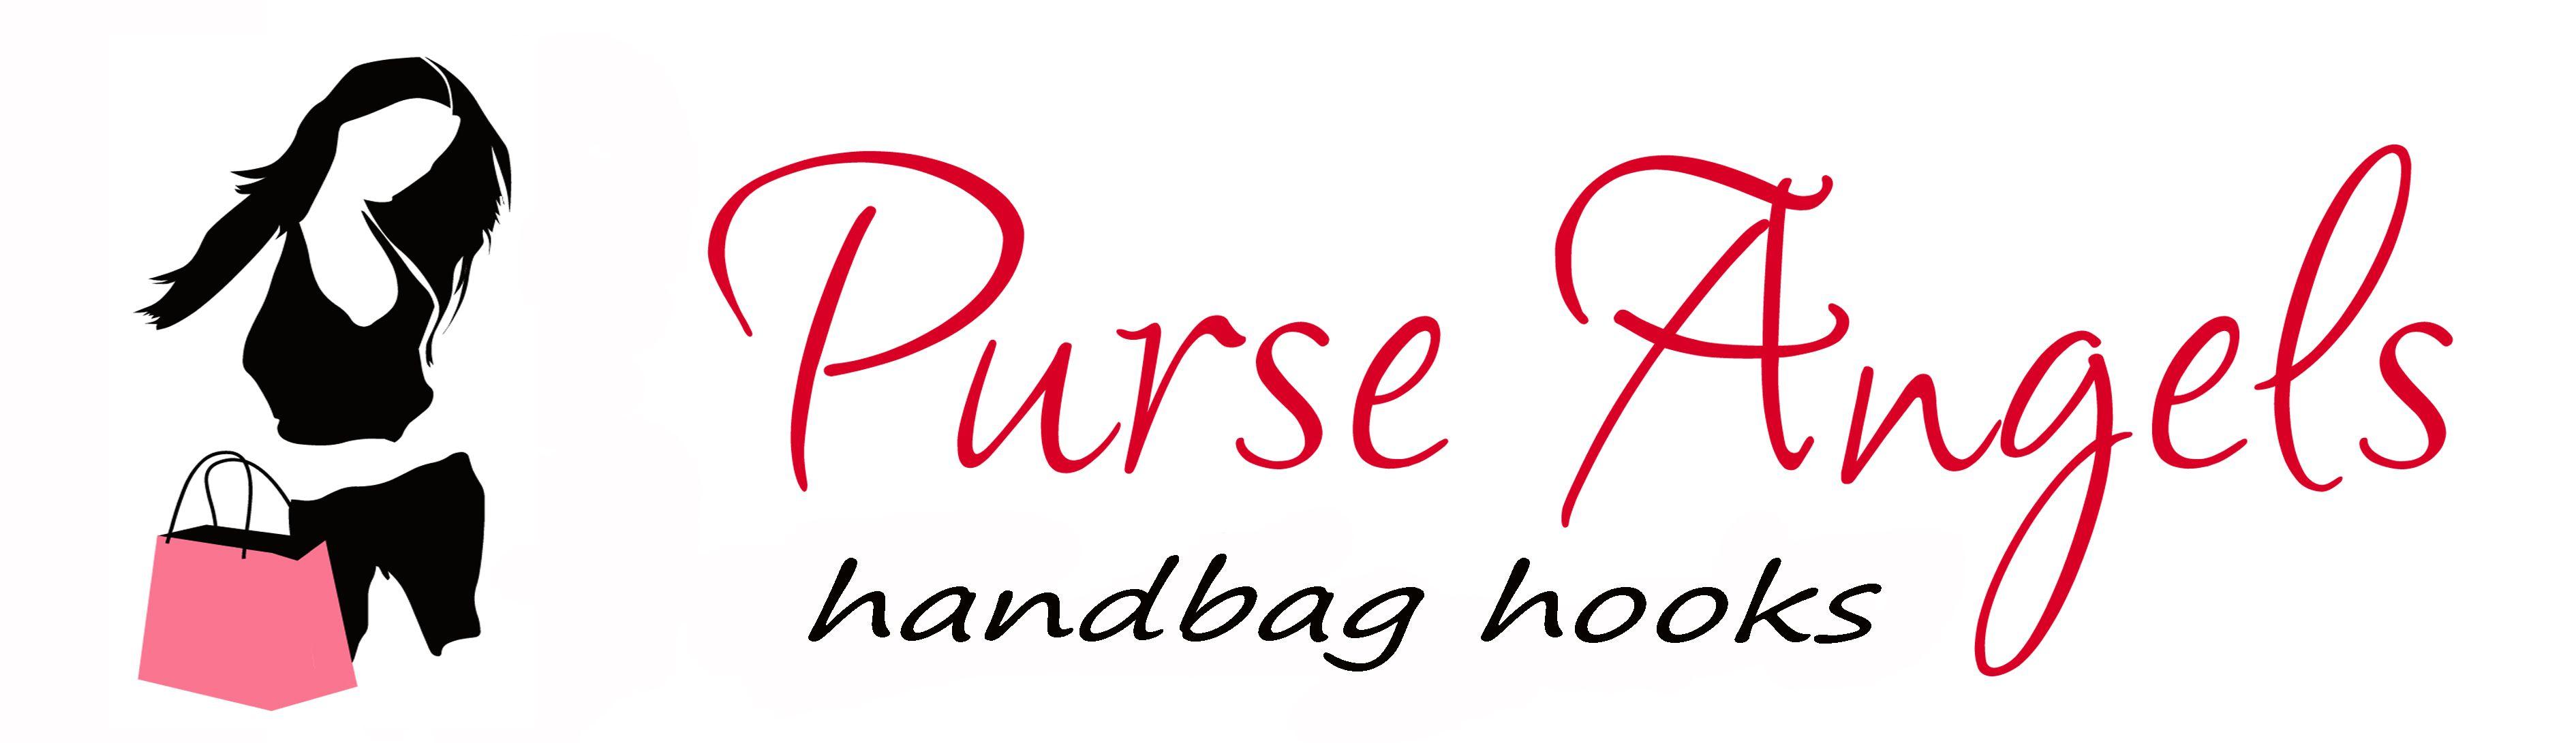 Purse Logo - Purse Angels Launches the Guardian of Handbags